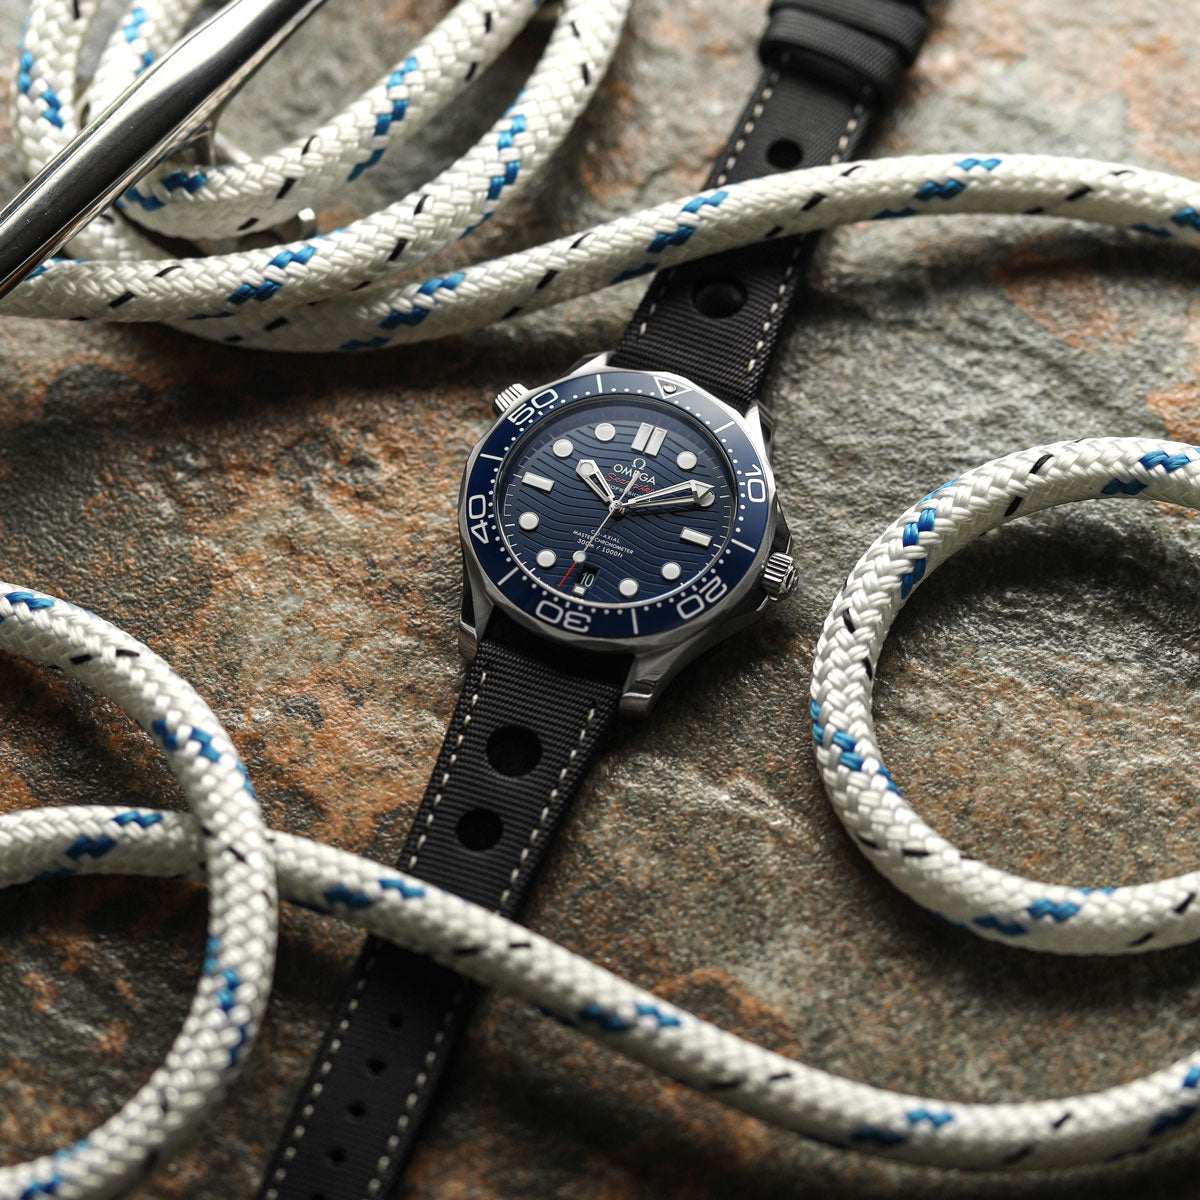 Mayday Anchor Sailcloth Divers Watch Strap - Shell - additional image 1